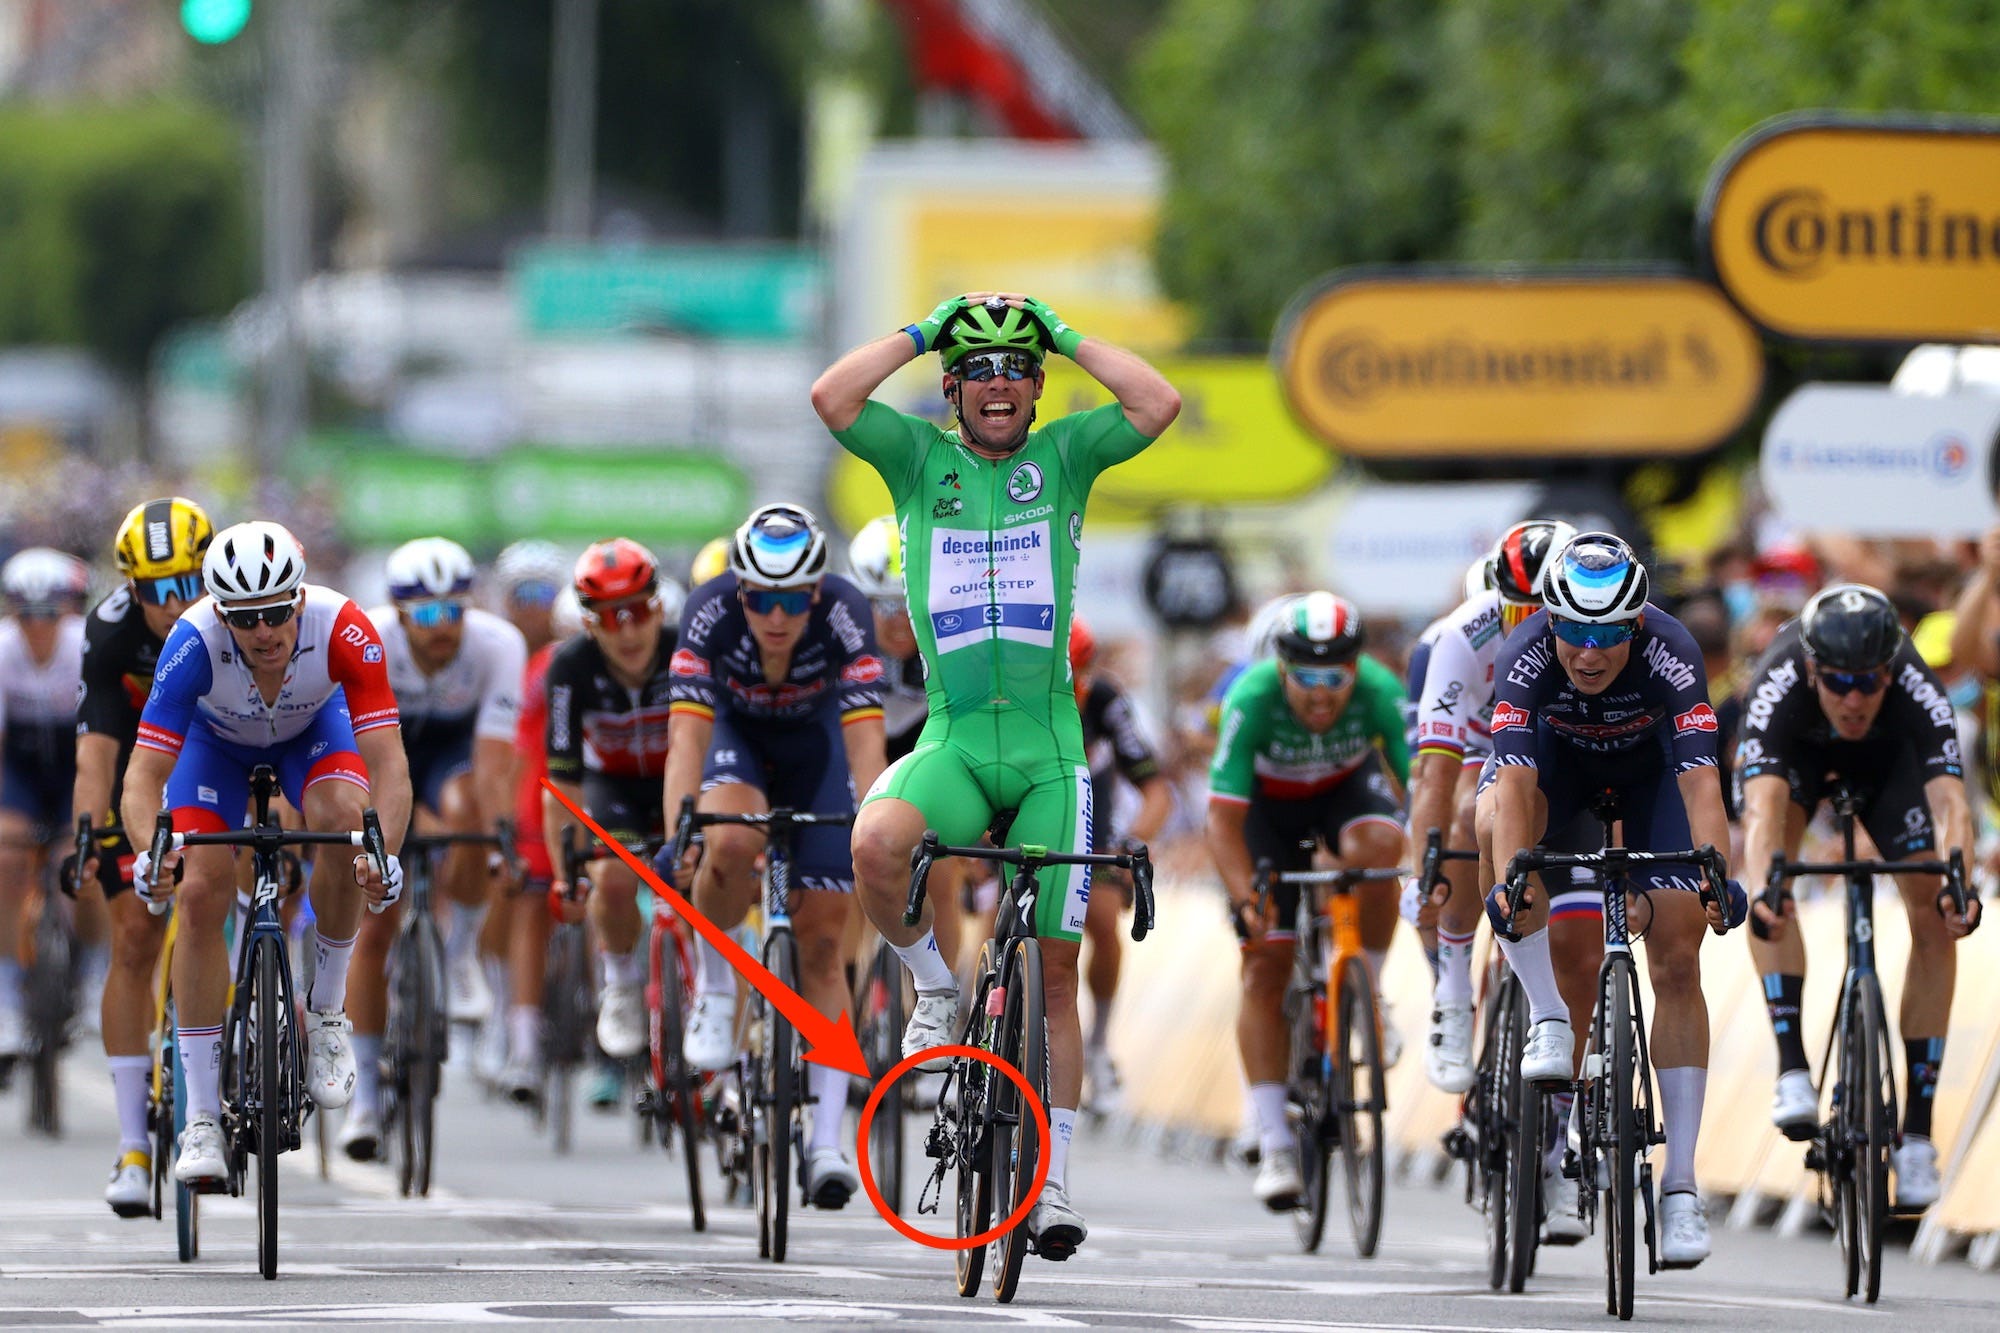 Mark Cavendish's chain falls off at Tour de France as he wins stage.